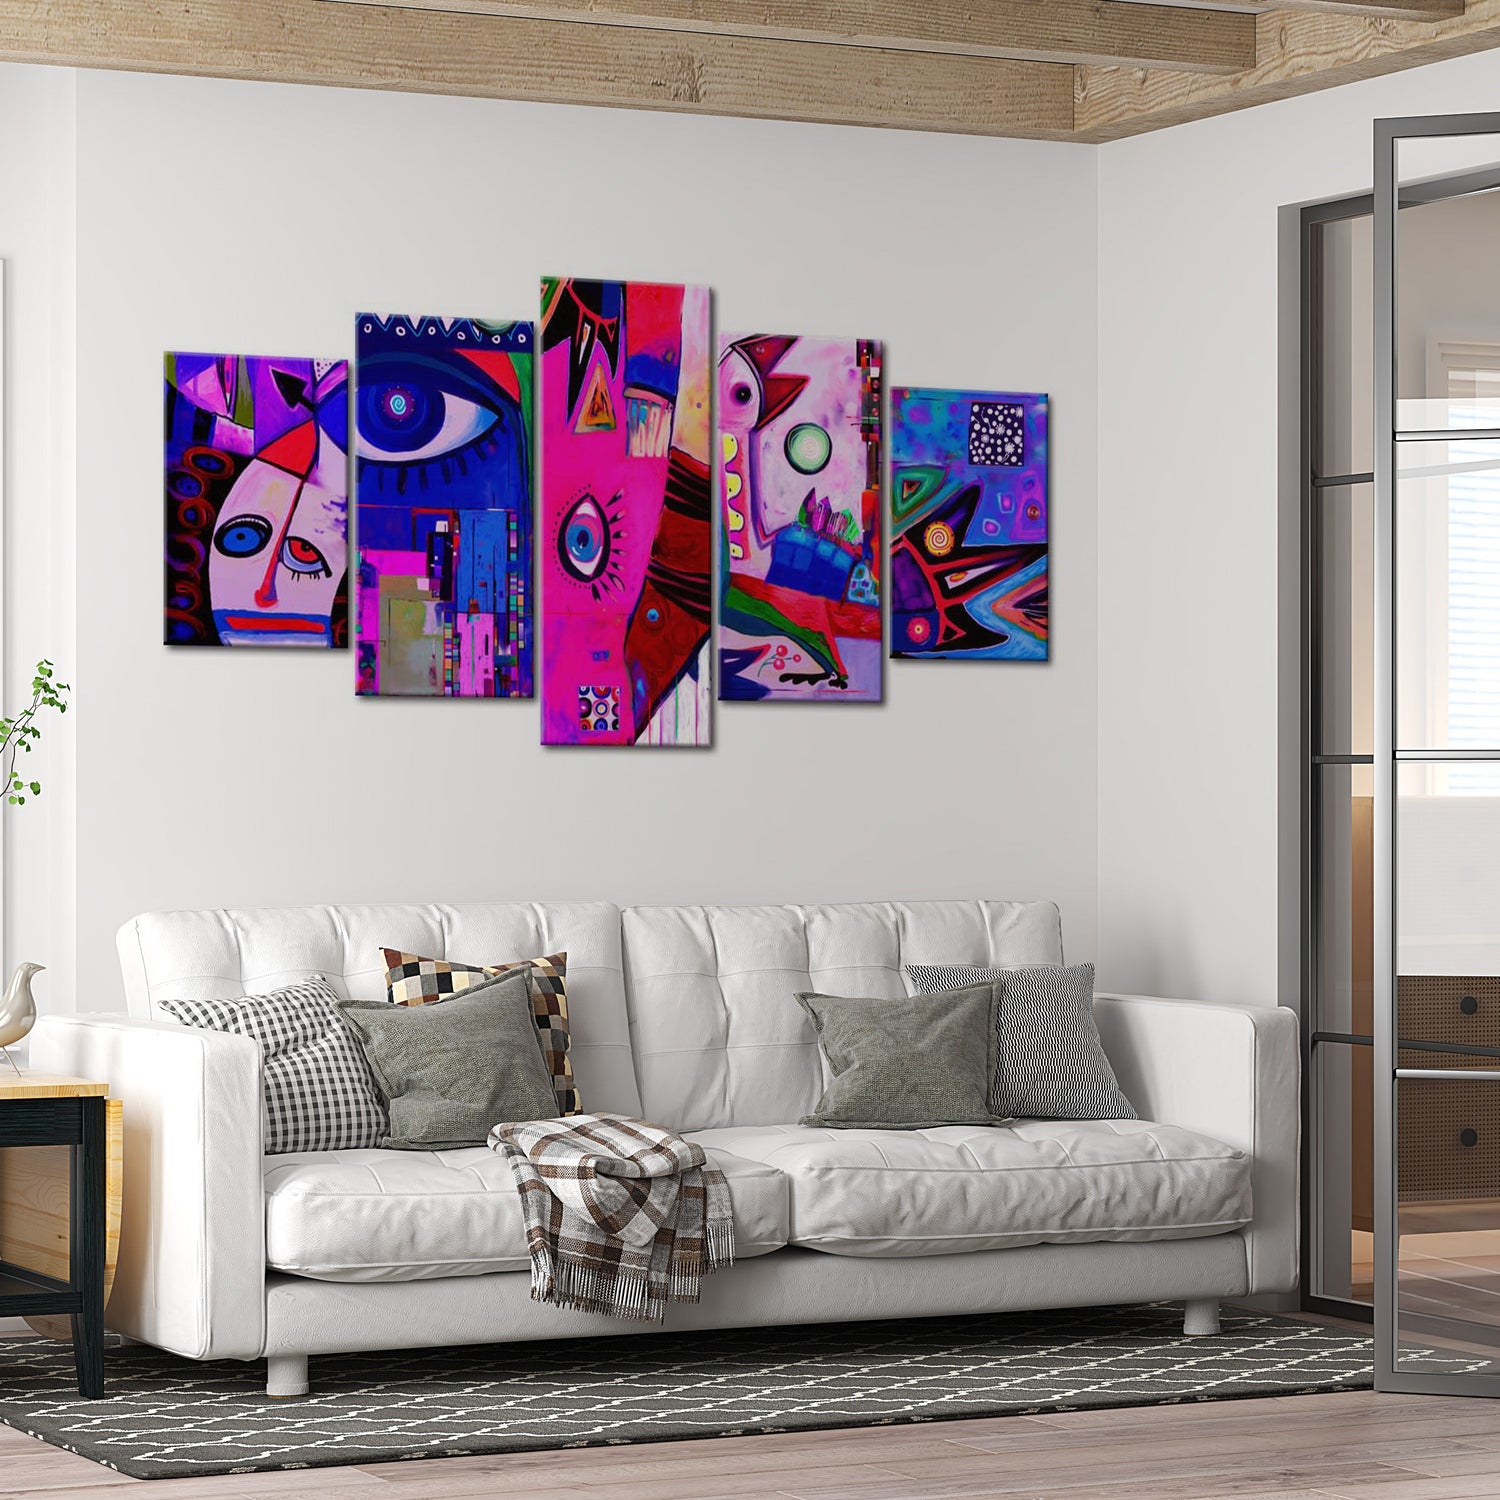 Abstract Canvas Wall Art - Funny Faces Pink - 5 Pieces